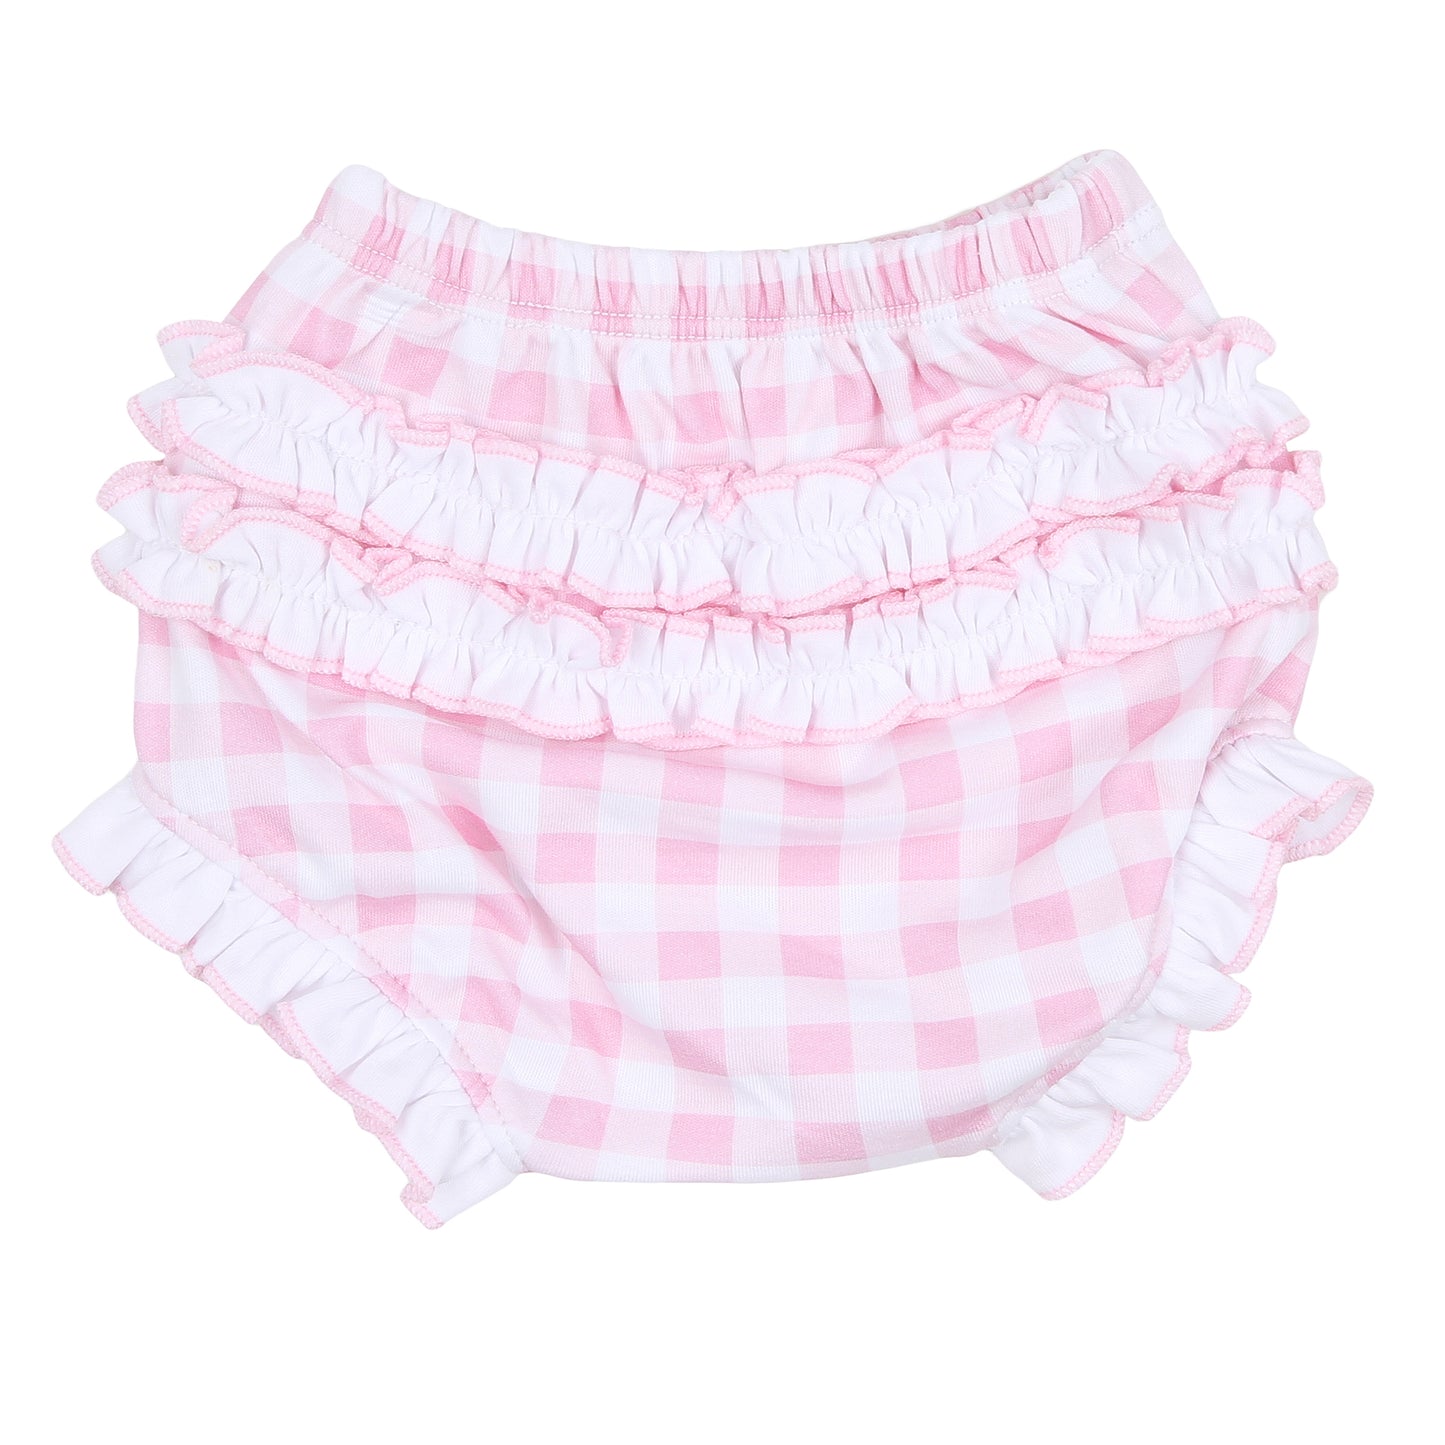 Baby Checks Pink Smocked Collared Ruffle Diaper Cover Set